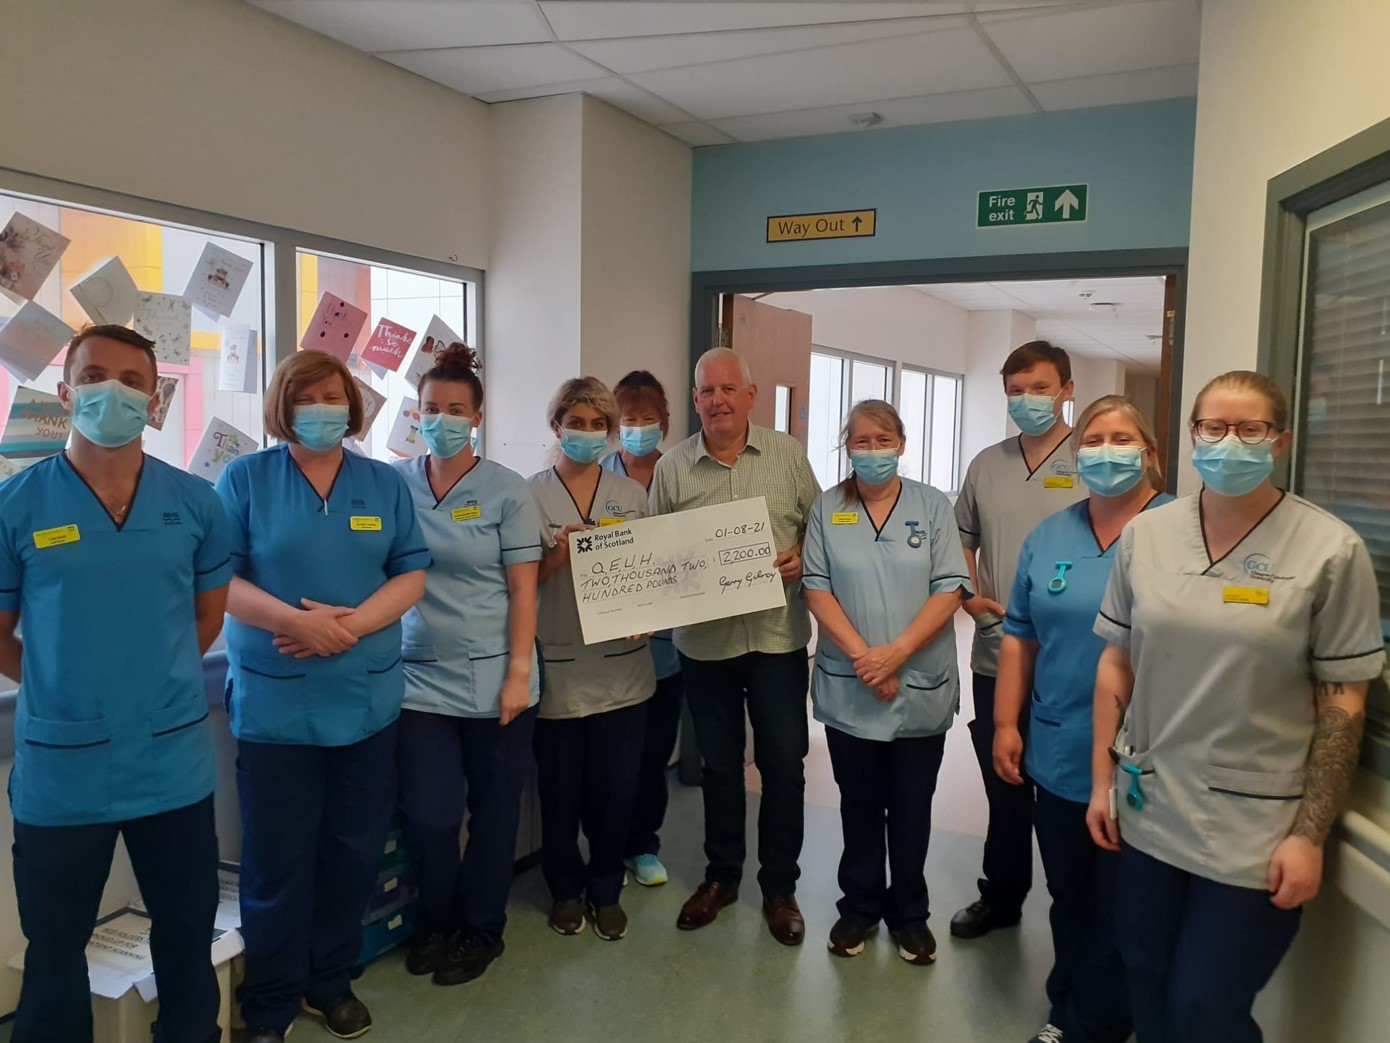 Covid: Clydebank Gerry Gilroy £2,200 gift of thanks to his NHS life-savers